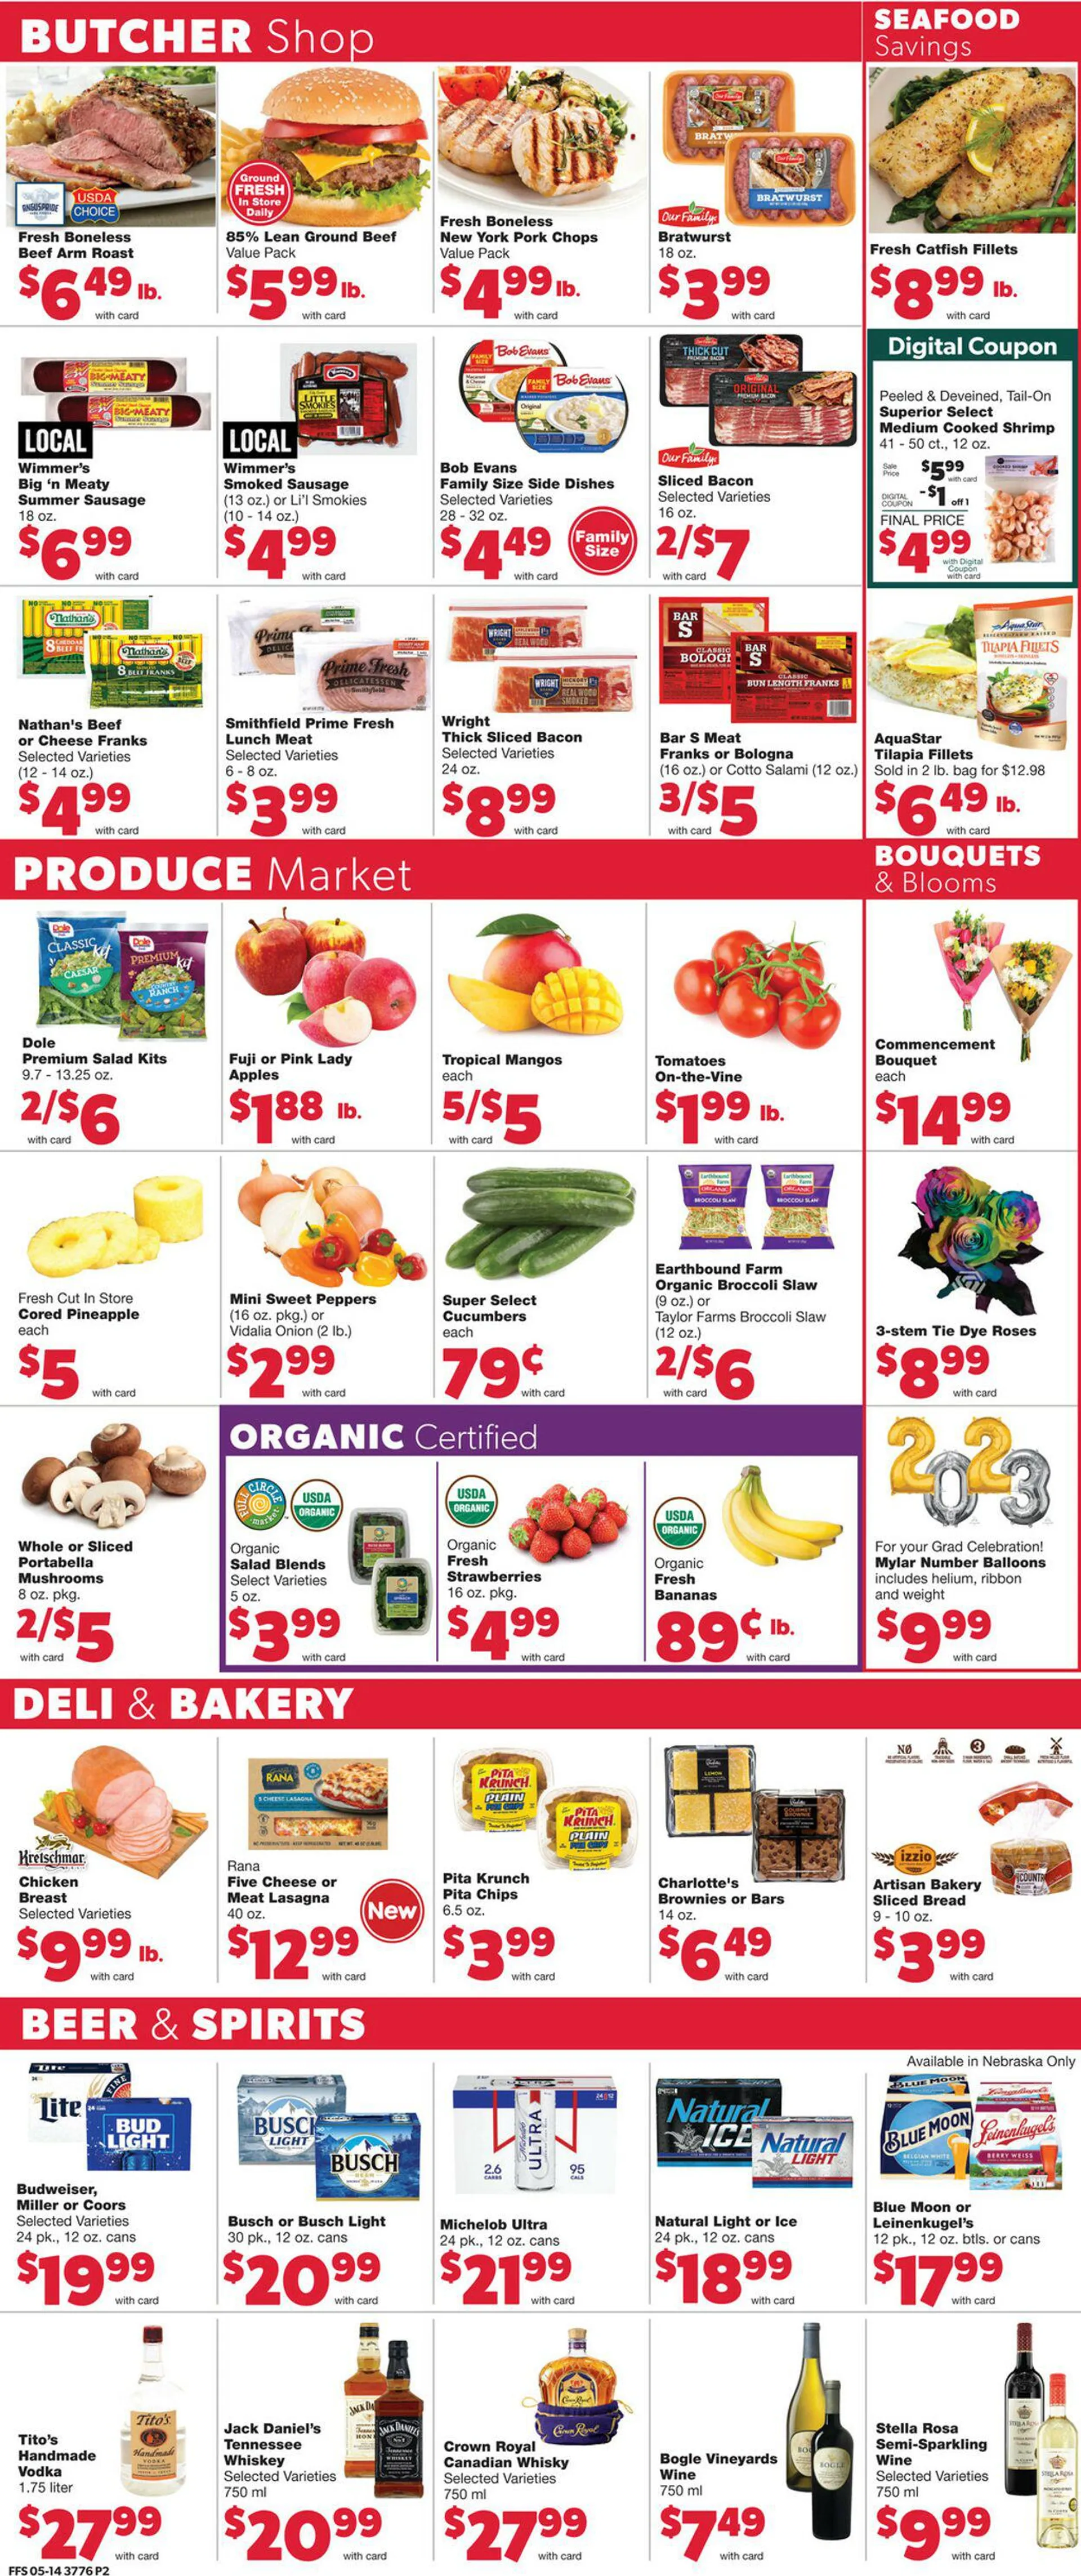 Family Fare Current weekly ad - 2